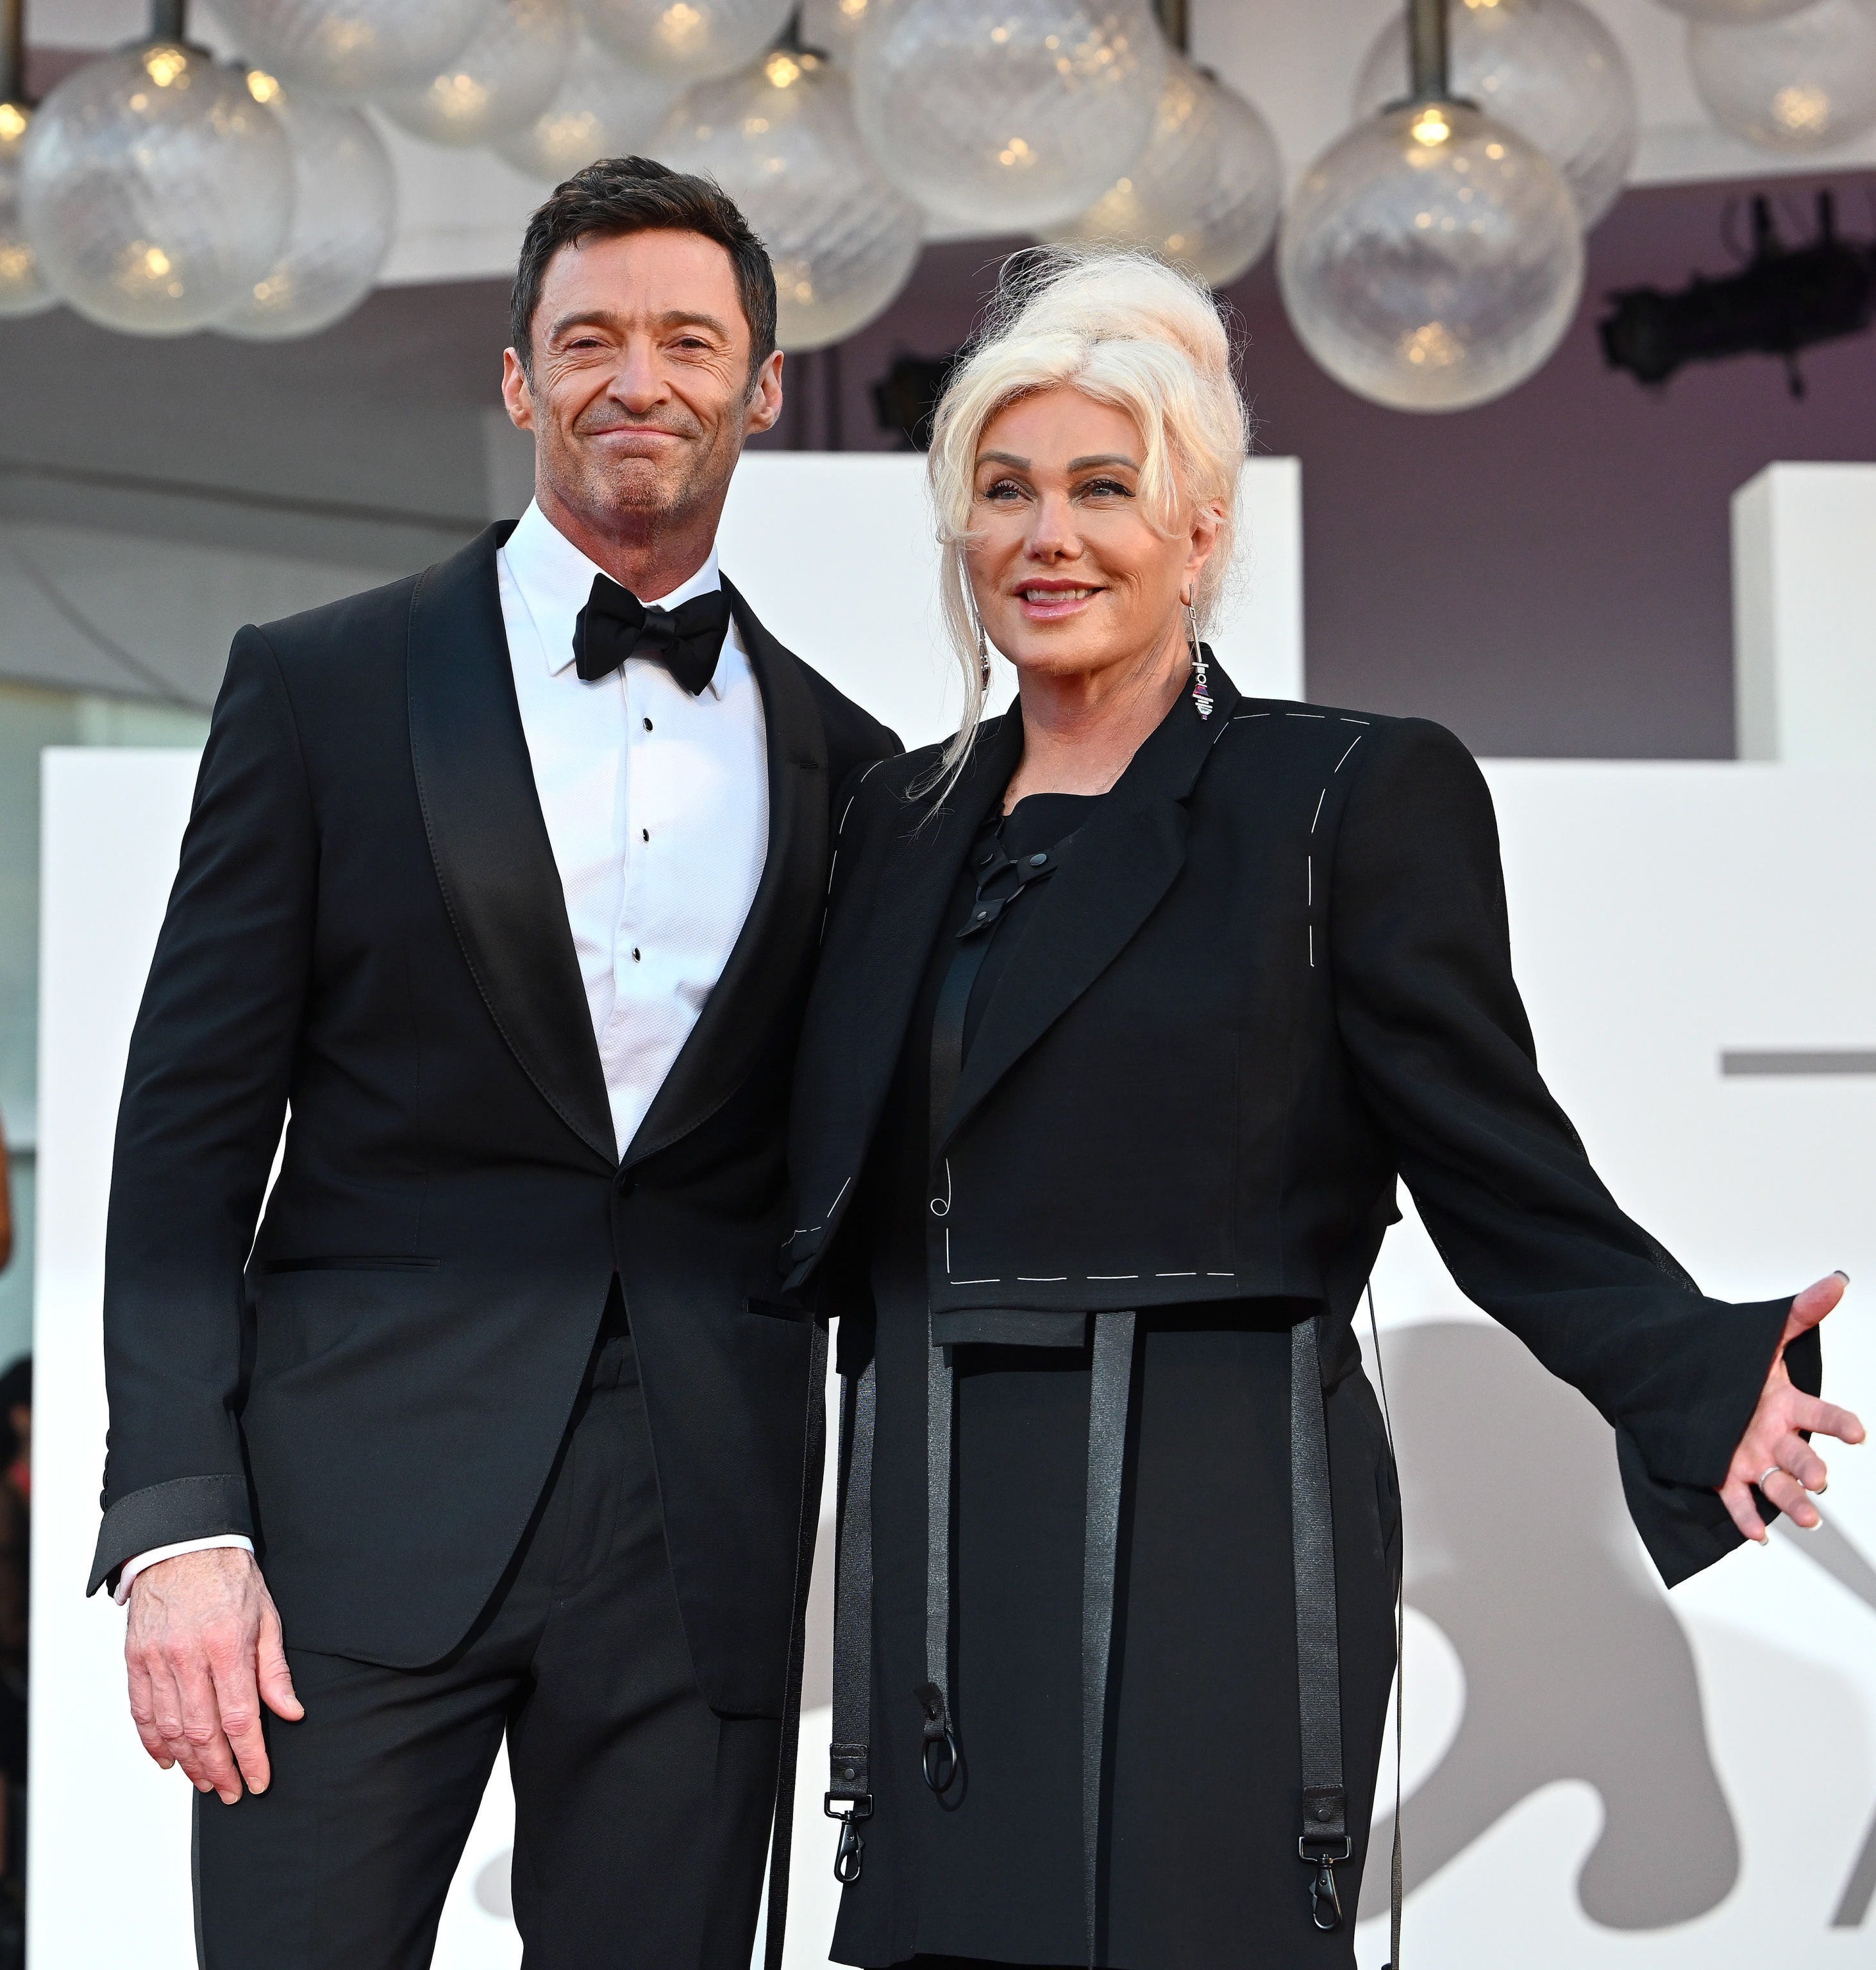 How much do you know about Hugh Jackman’s wife, Deborra-Lee Furness? Photo: EPA-EPE